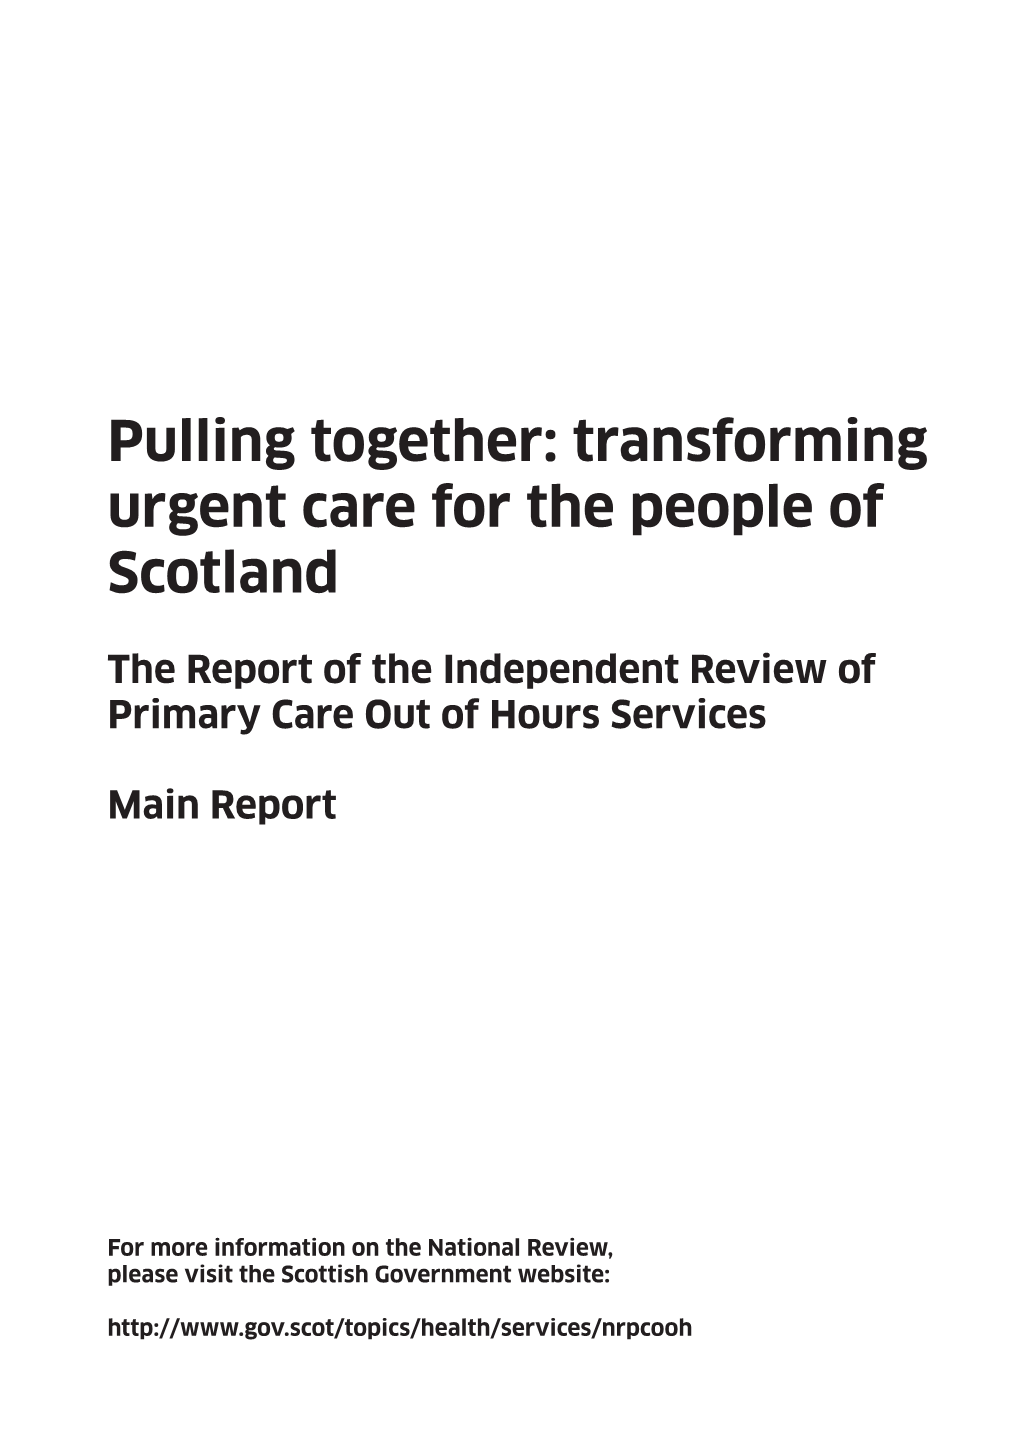 Pulling Together: Transforming Urgent Care for the People of Scotland